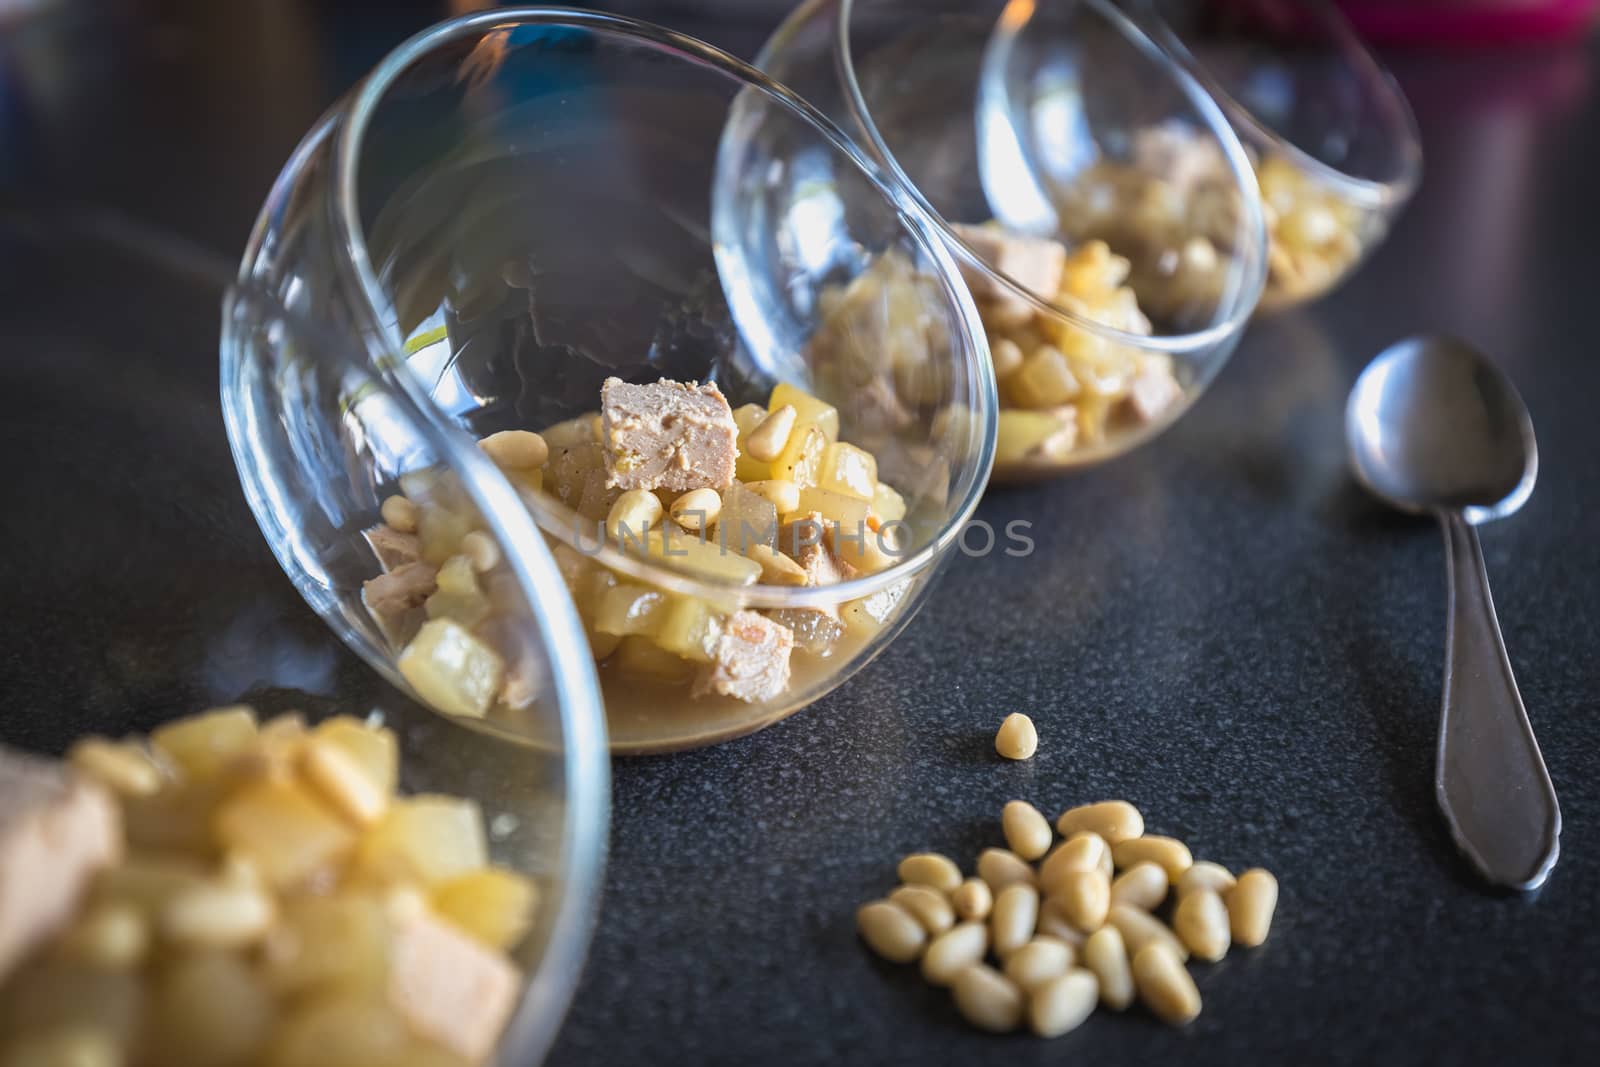 Verrine of pear foie gras and pine nuts in French cuisine